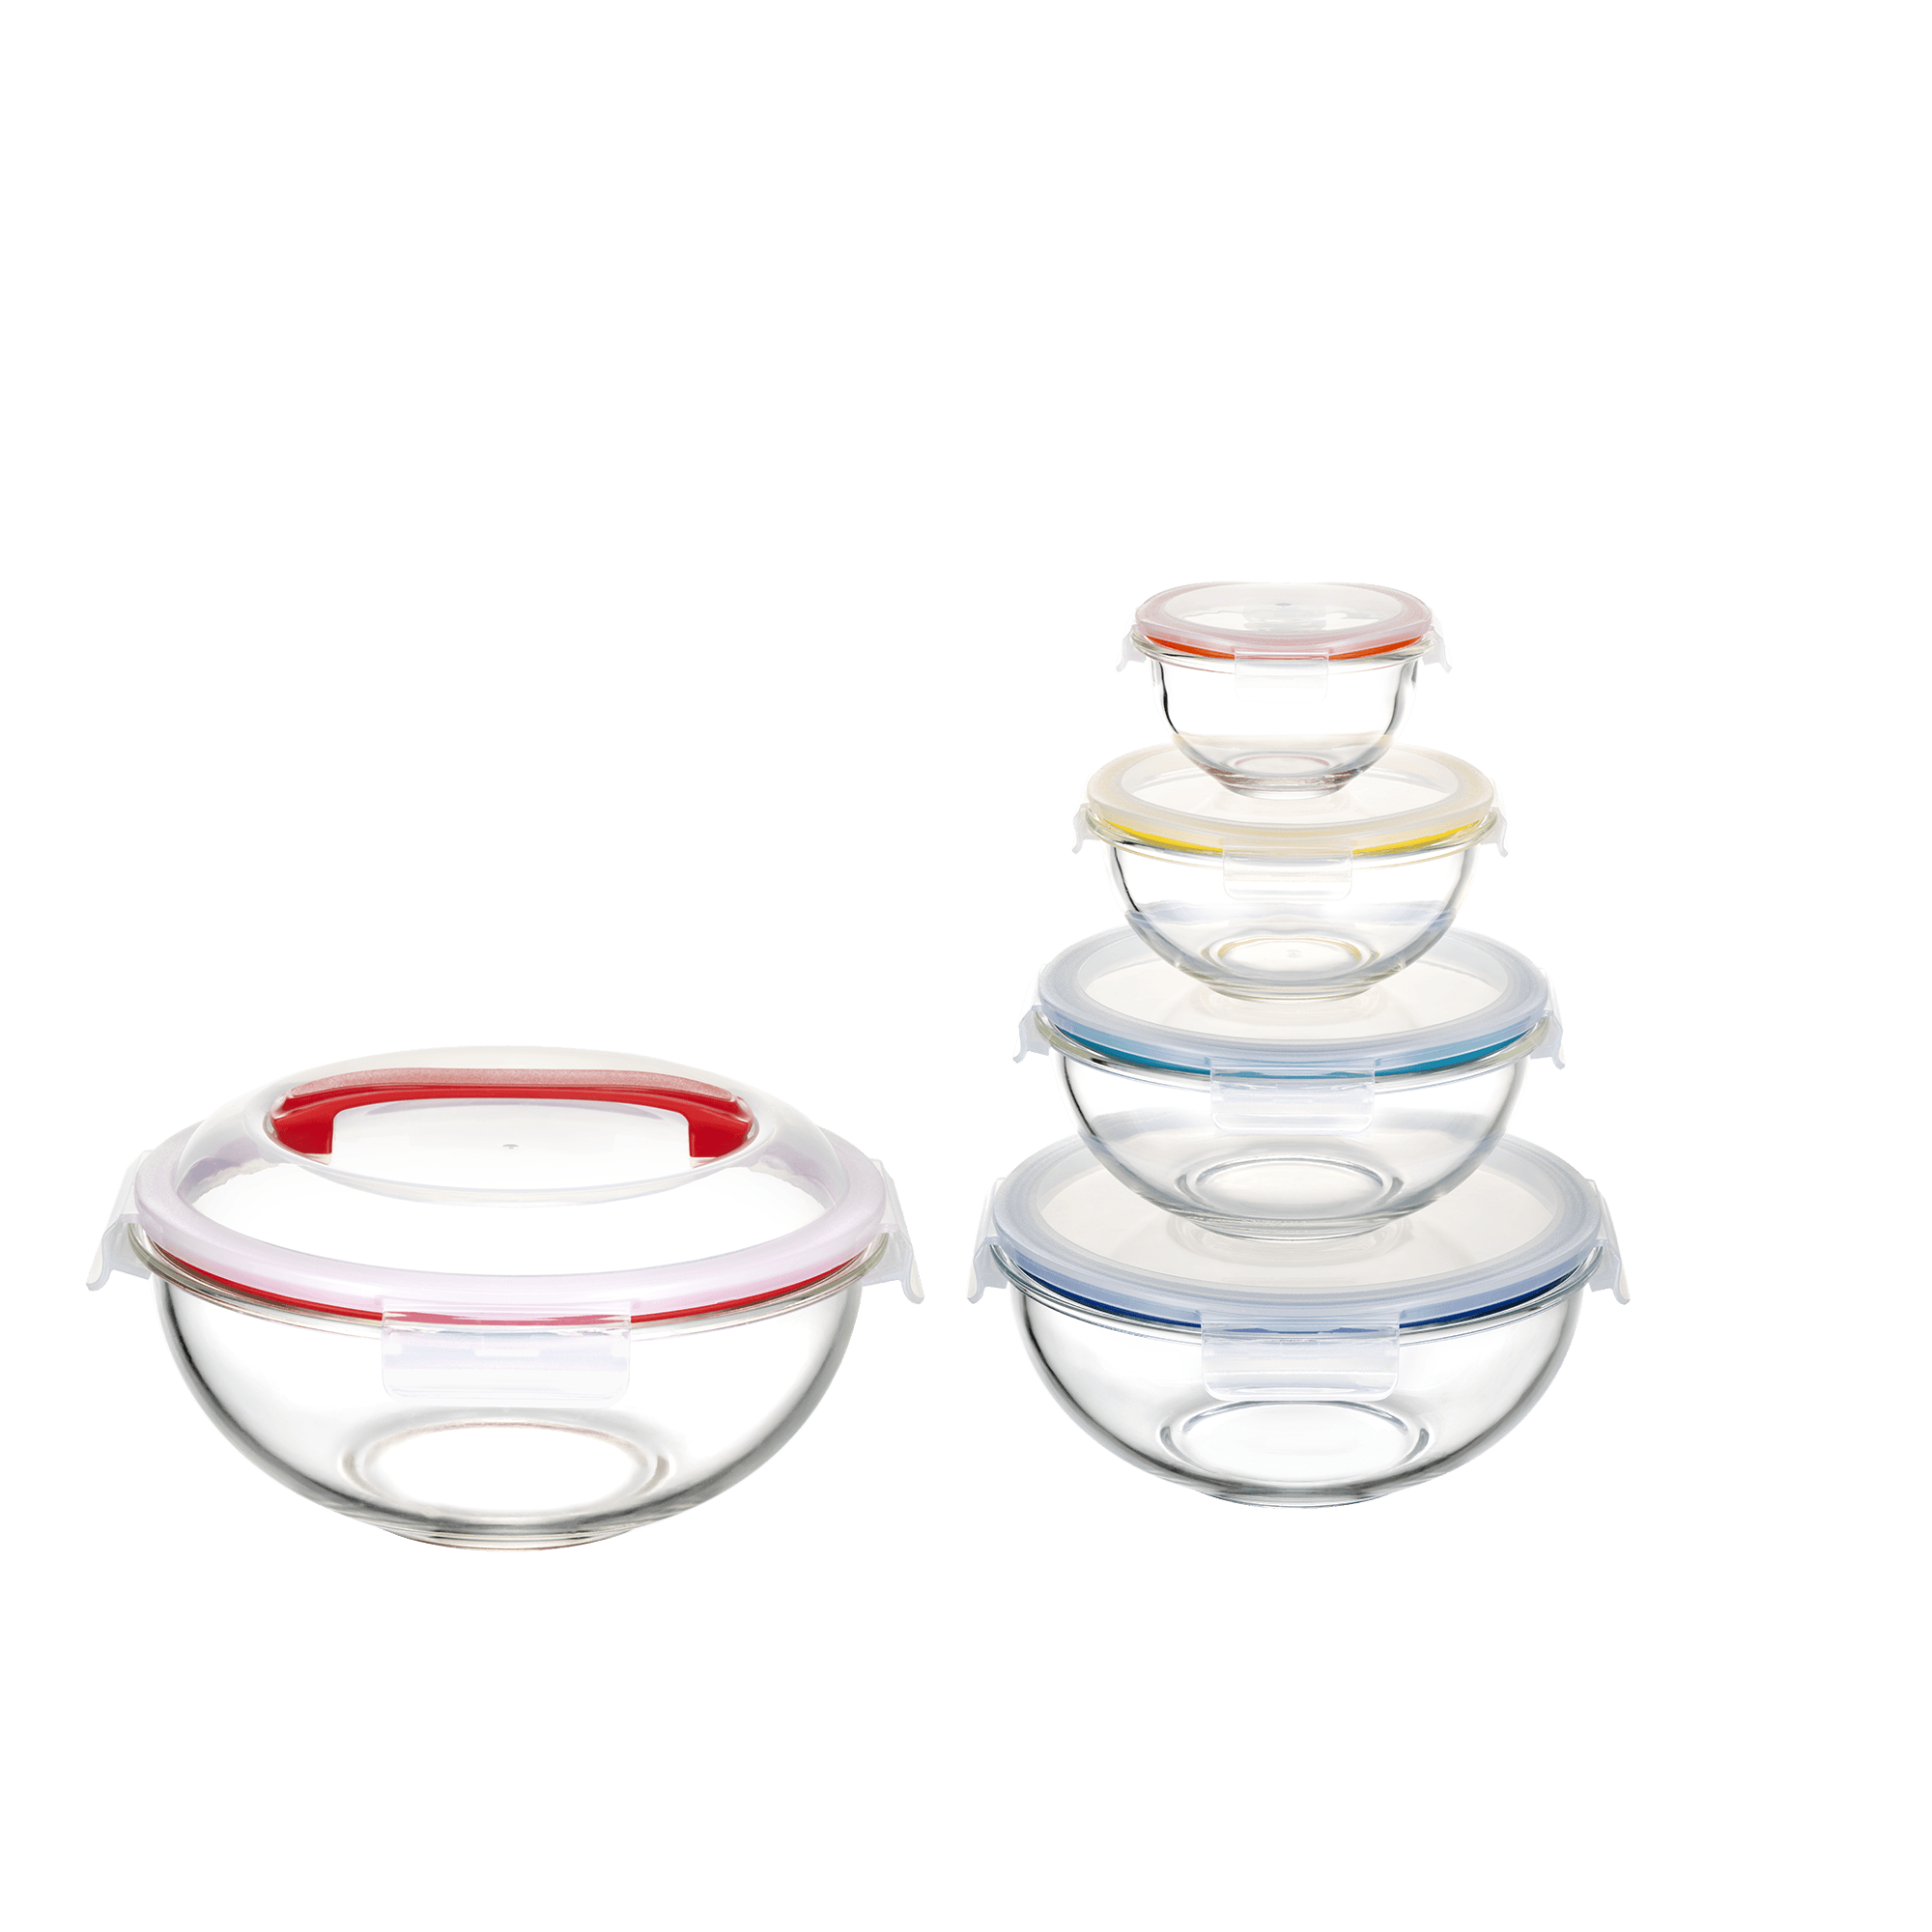 Glass Microwave Bowls, Glass Bowl Cover, Glass Bowls Lids, Glass Oven Lid